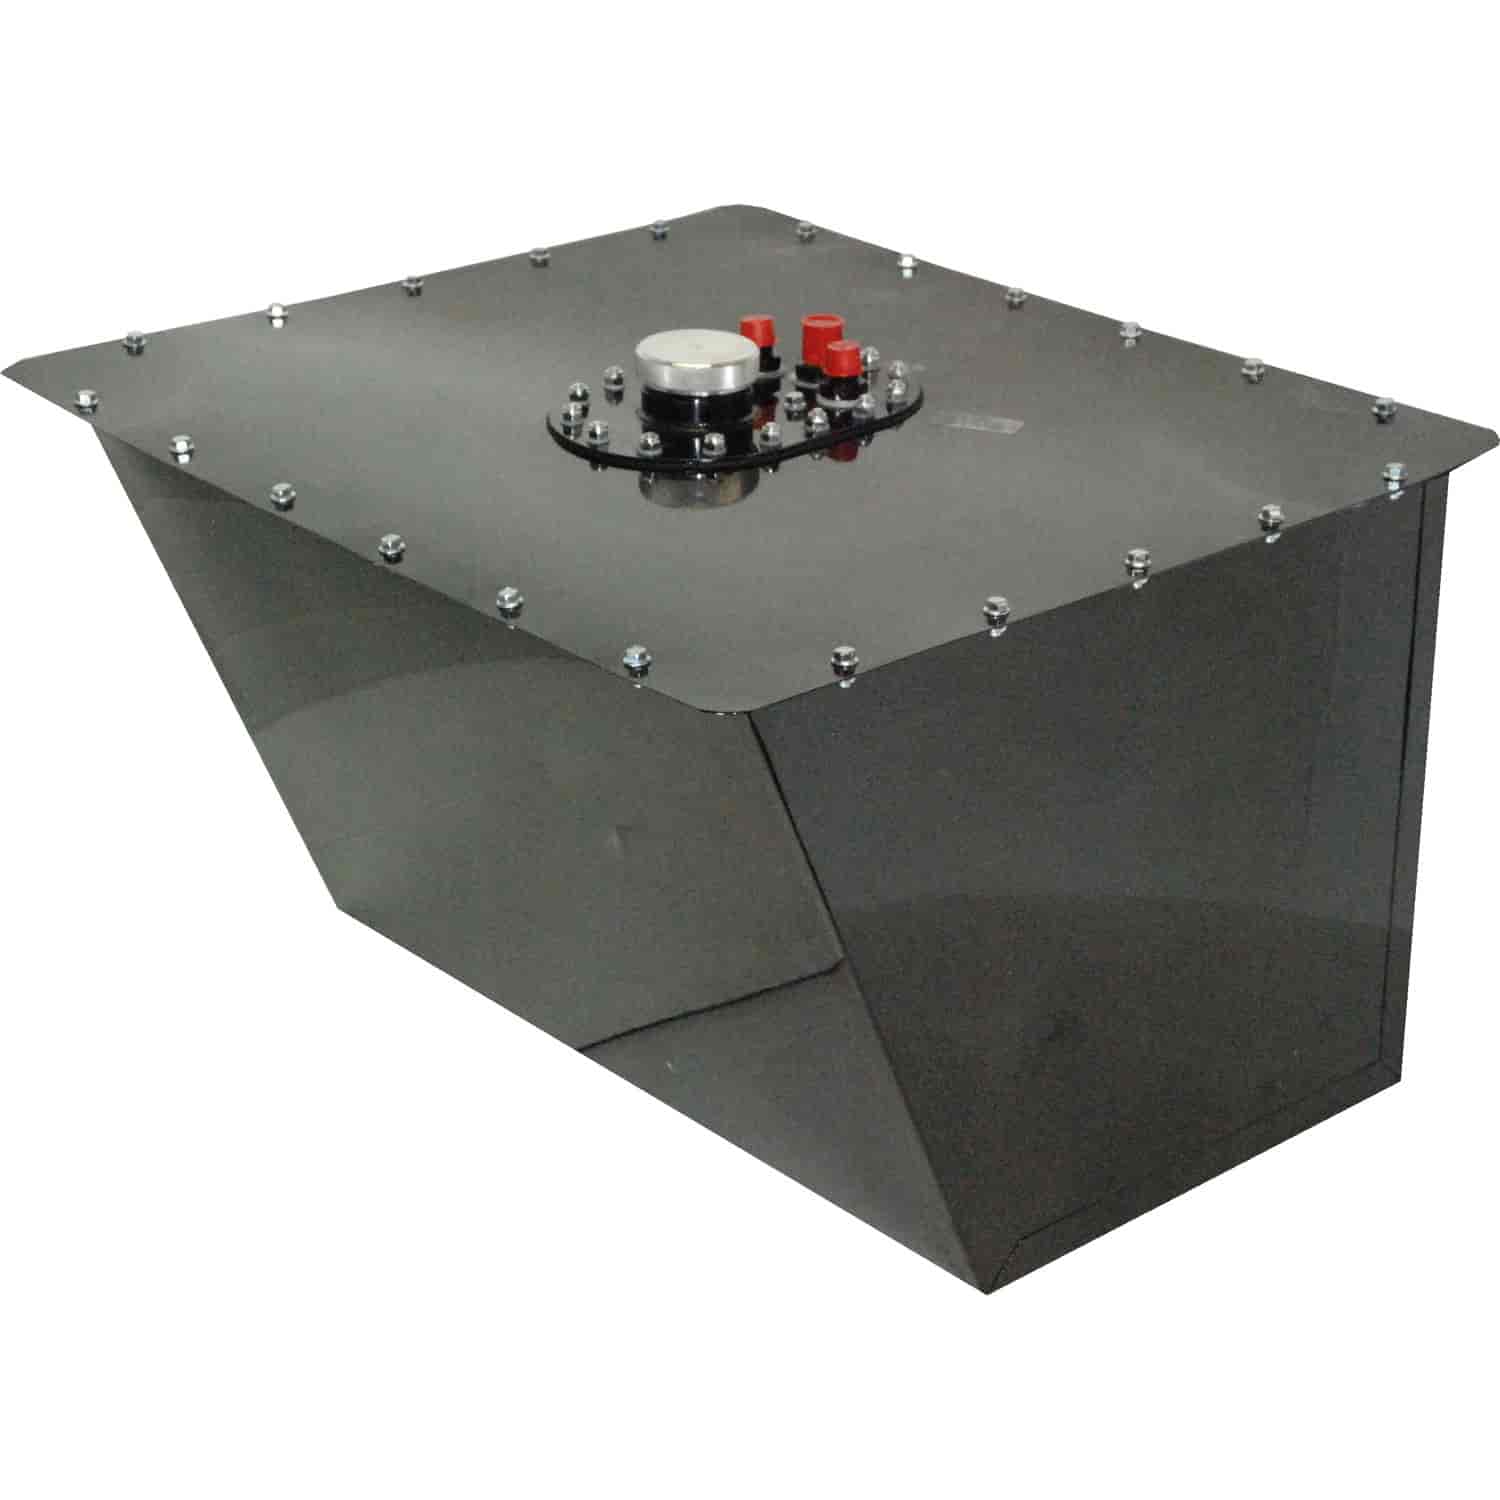 Wedge Steel Fuel Cell Dimensions: Length Top: 25"